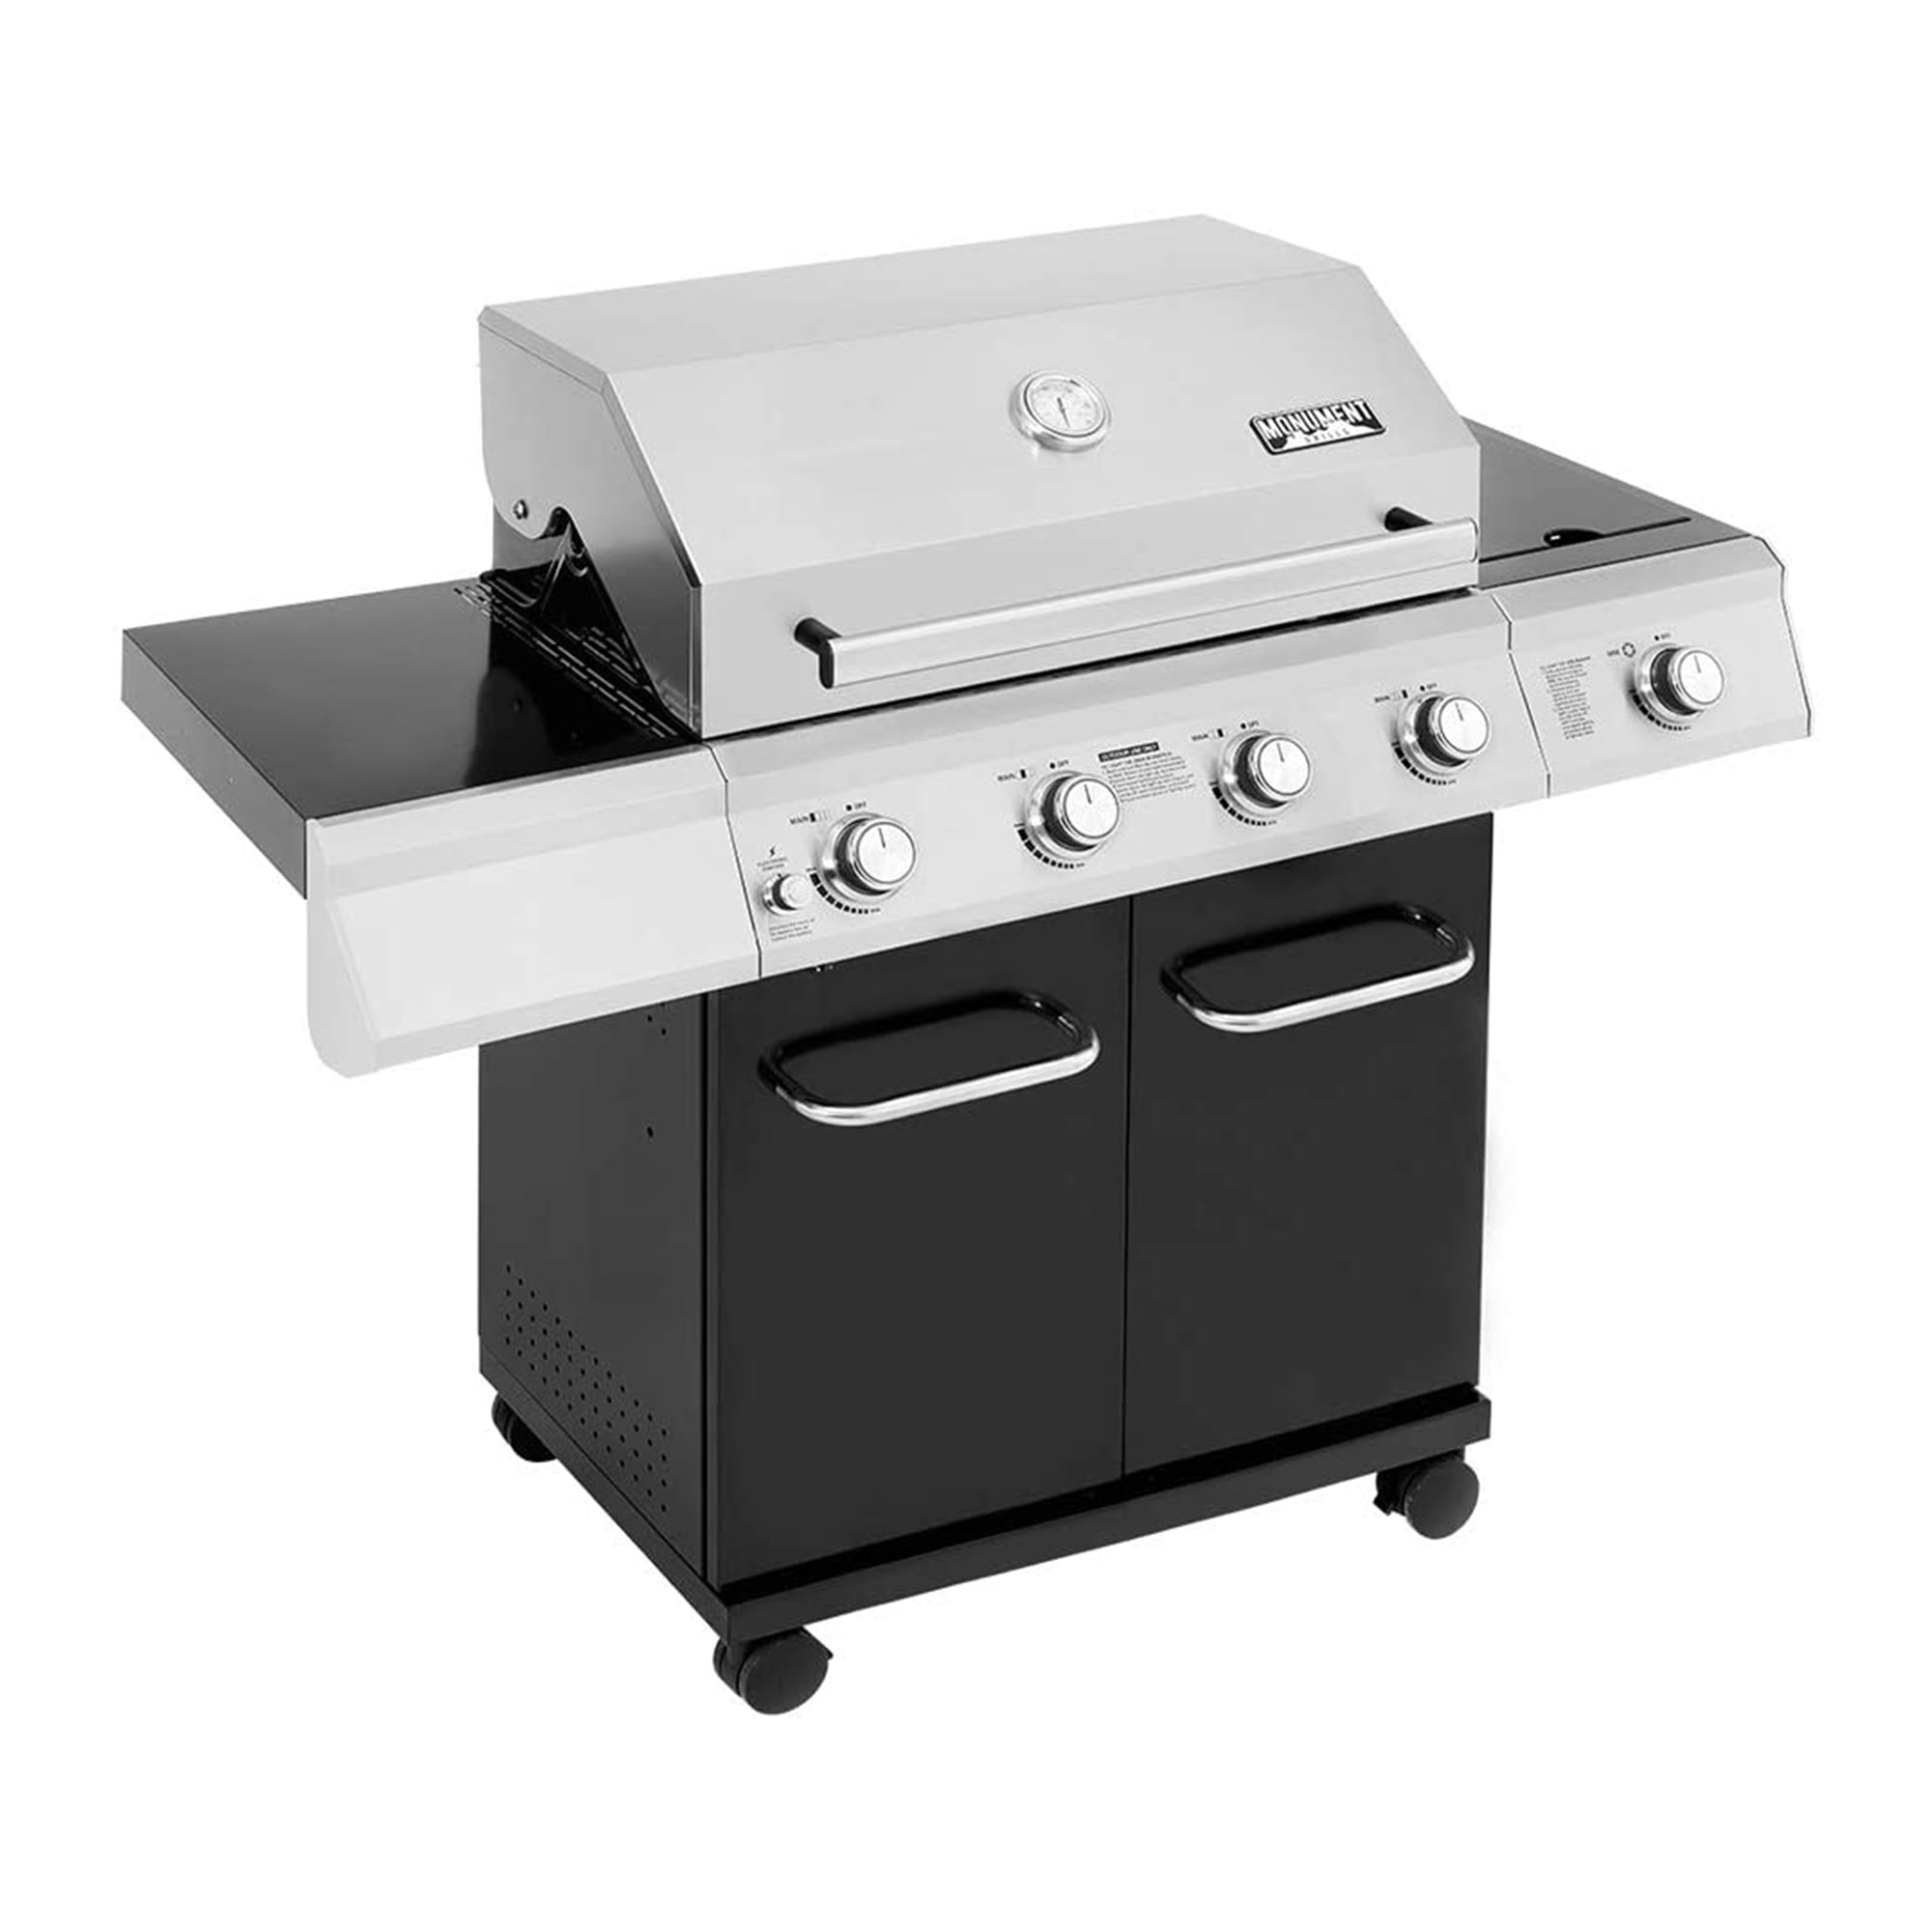 Monument Grills 17842 Stainless Steel 4-Burner Propane Gas Grill with Rotisserie - Silver